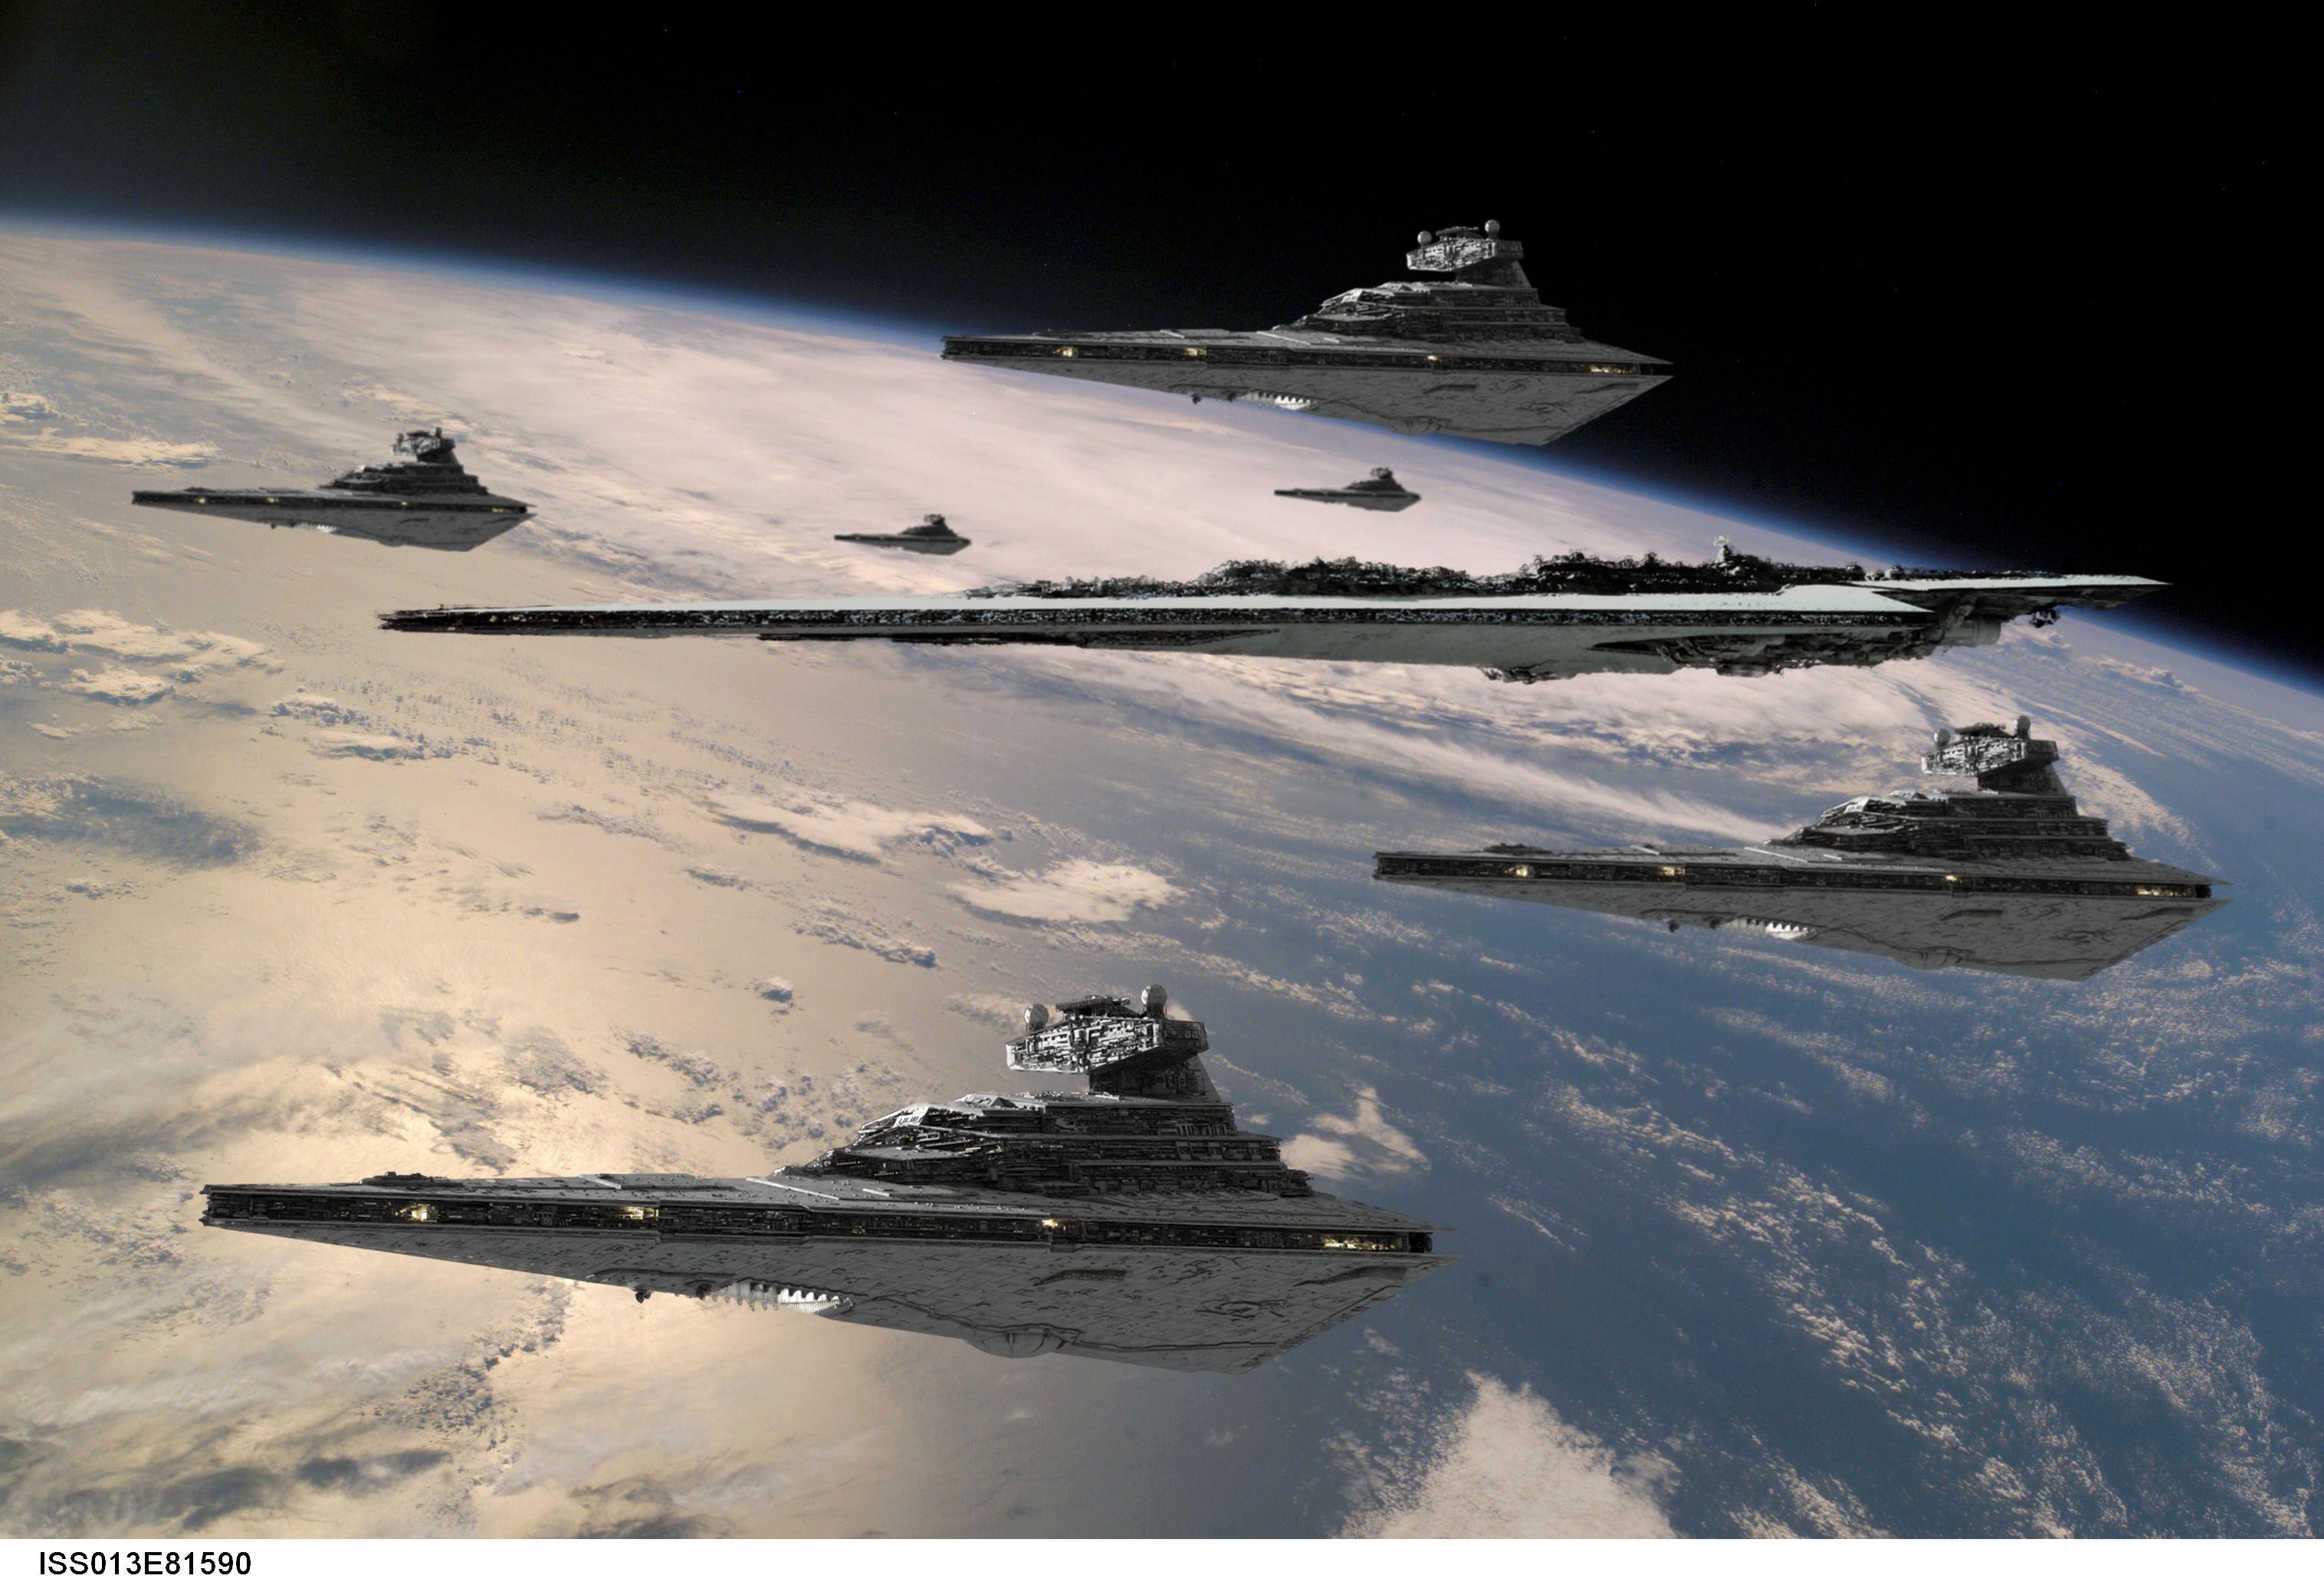 The Imperial fleet looms over a nearby planet HD Wallpaper